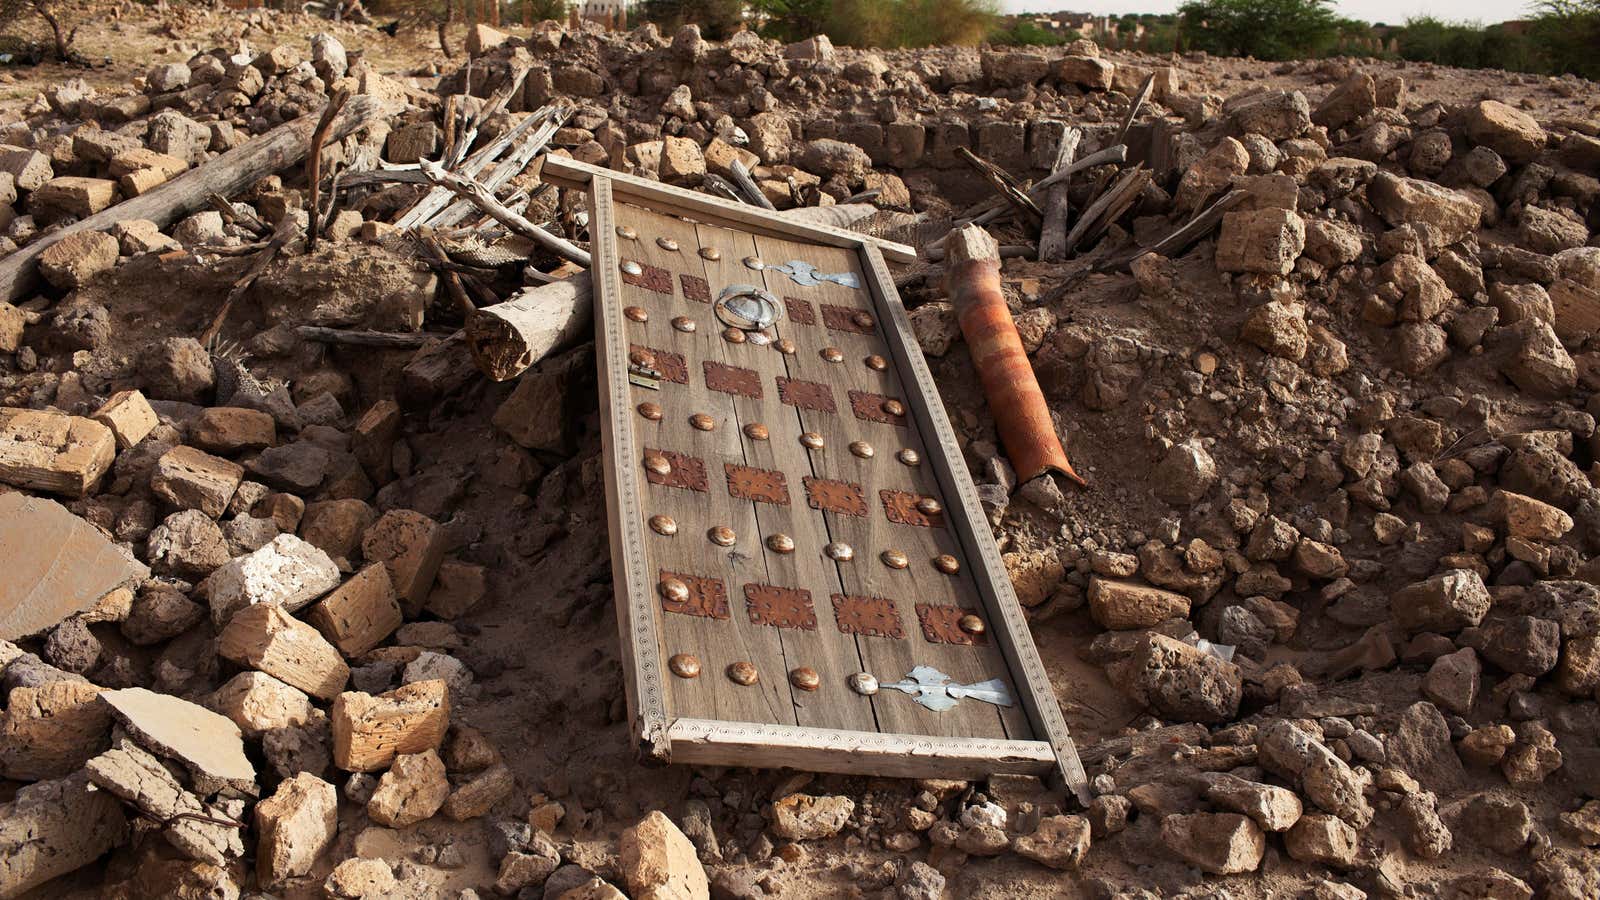 Rubble from an ancient mausoleum destroyed by Islamist militants in Timbuktu.